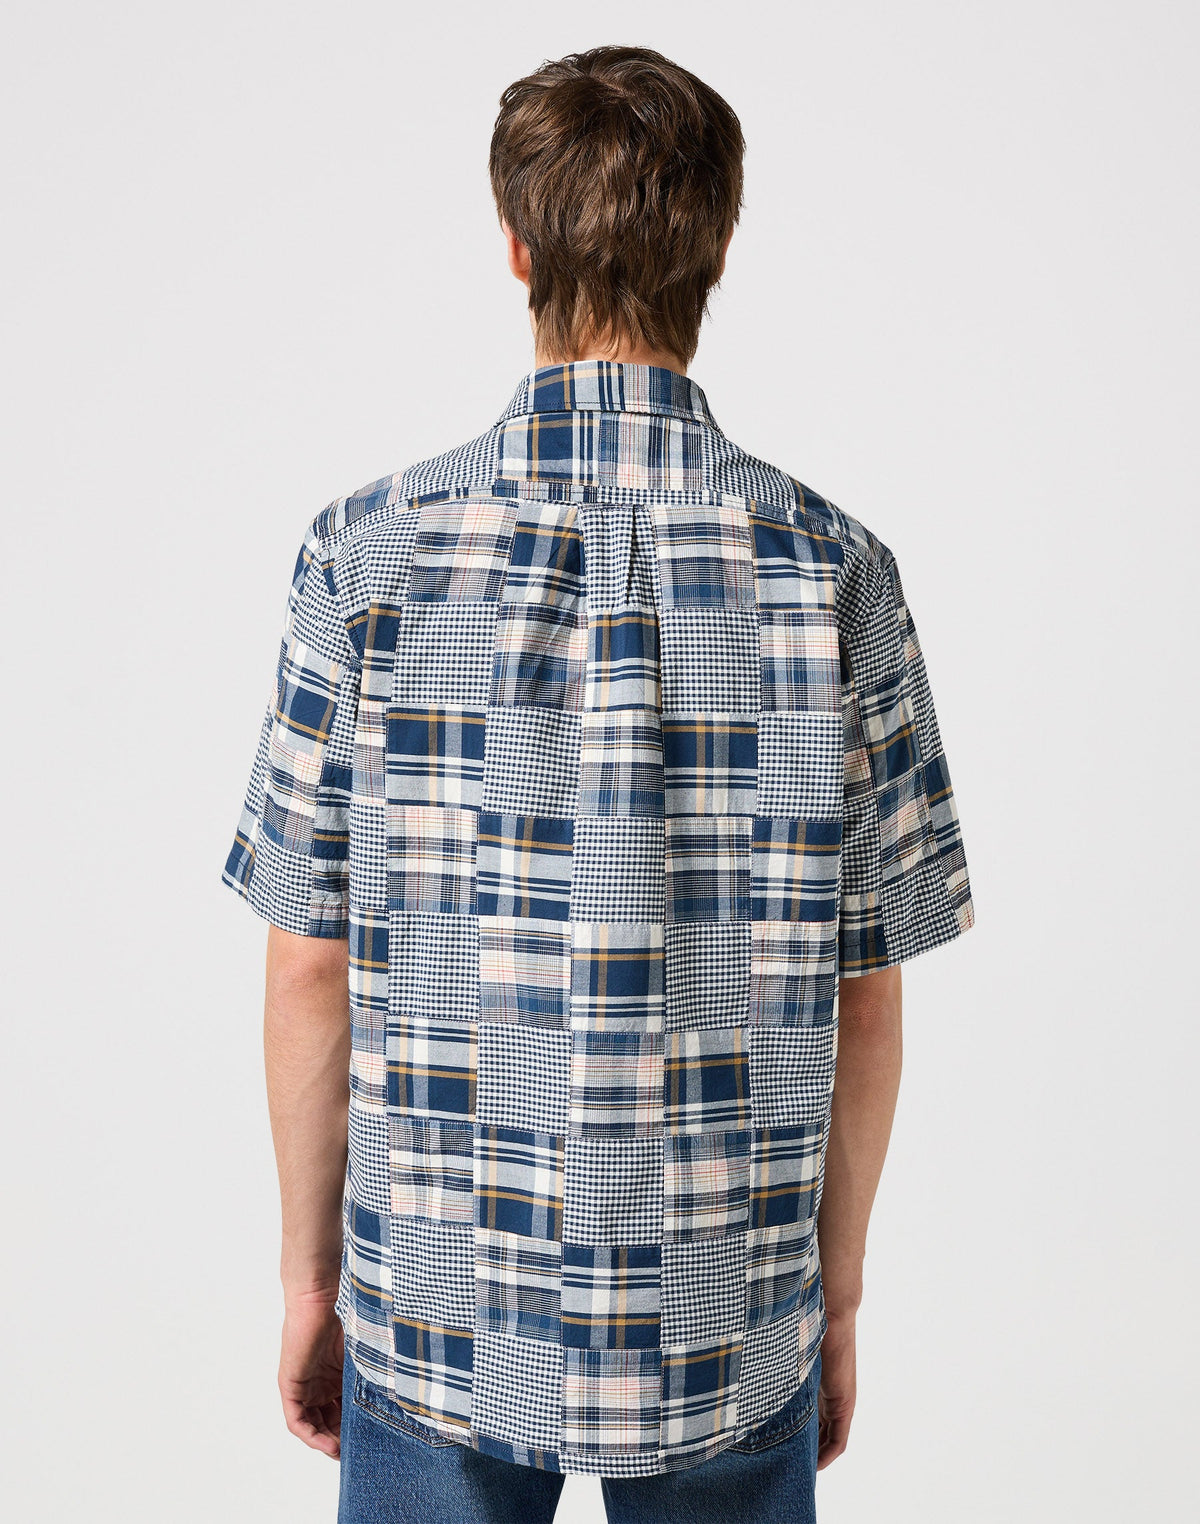 One Pocket Shirt in Blue Patchwork